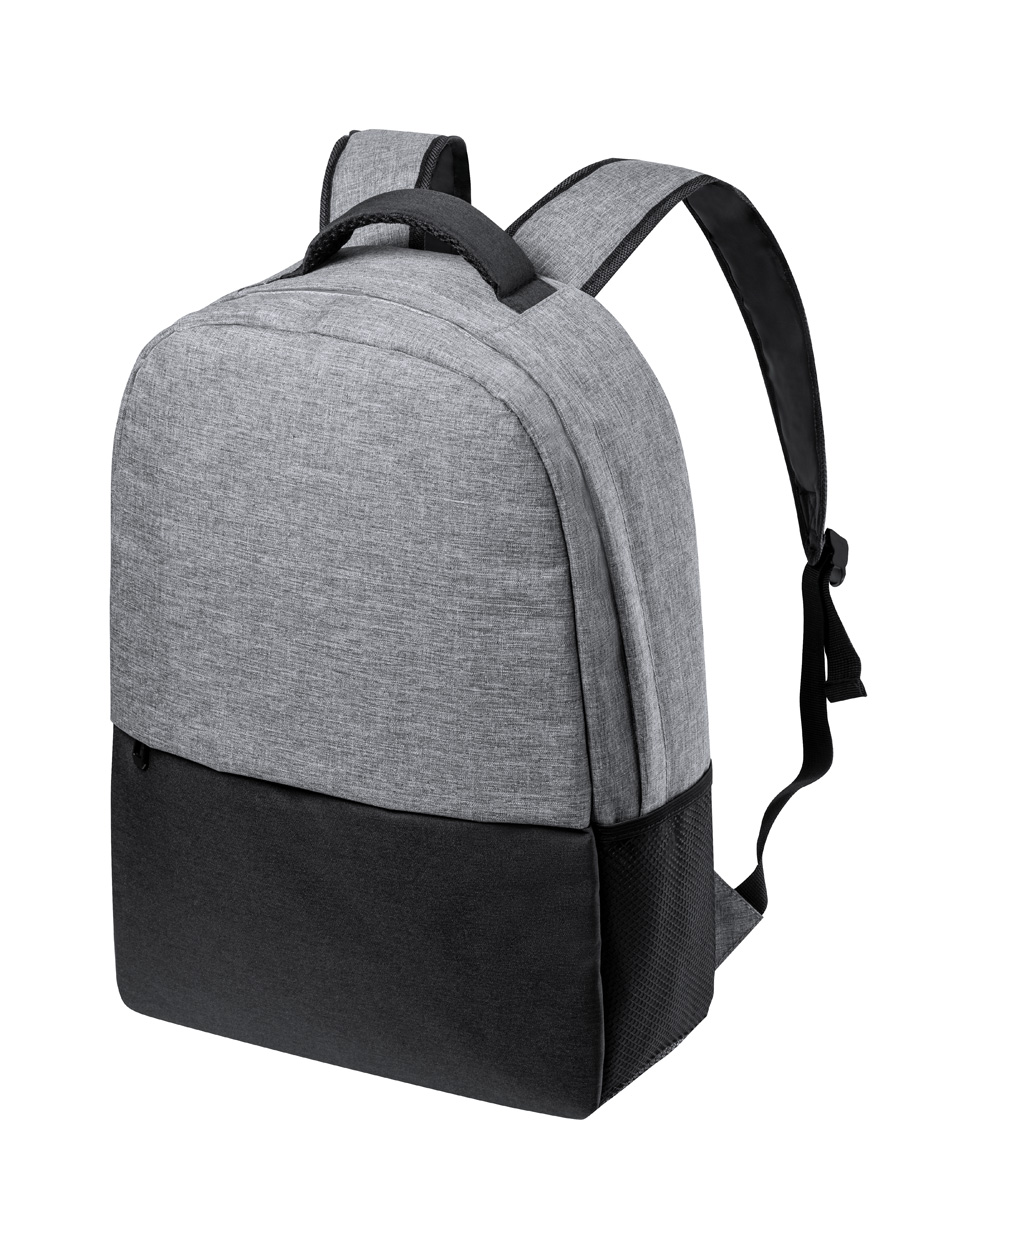 City backpack TERREX made of recycled material - grey